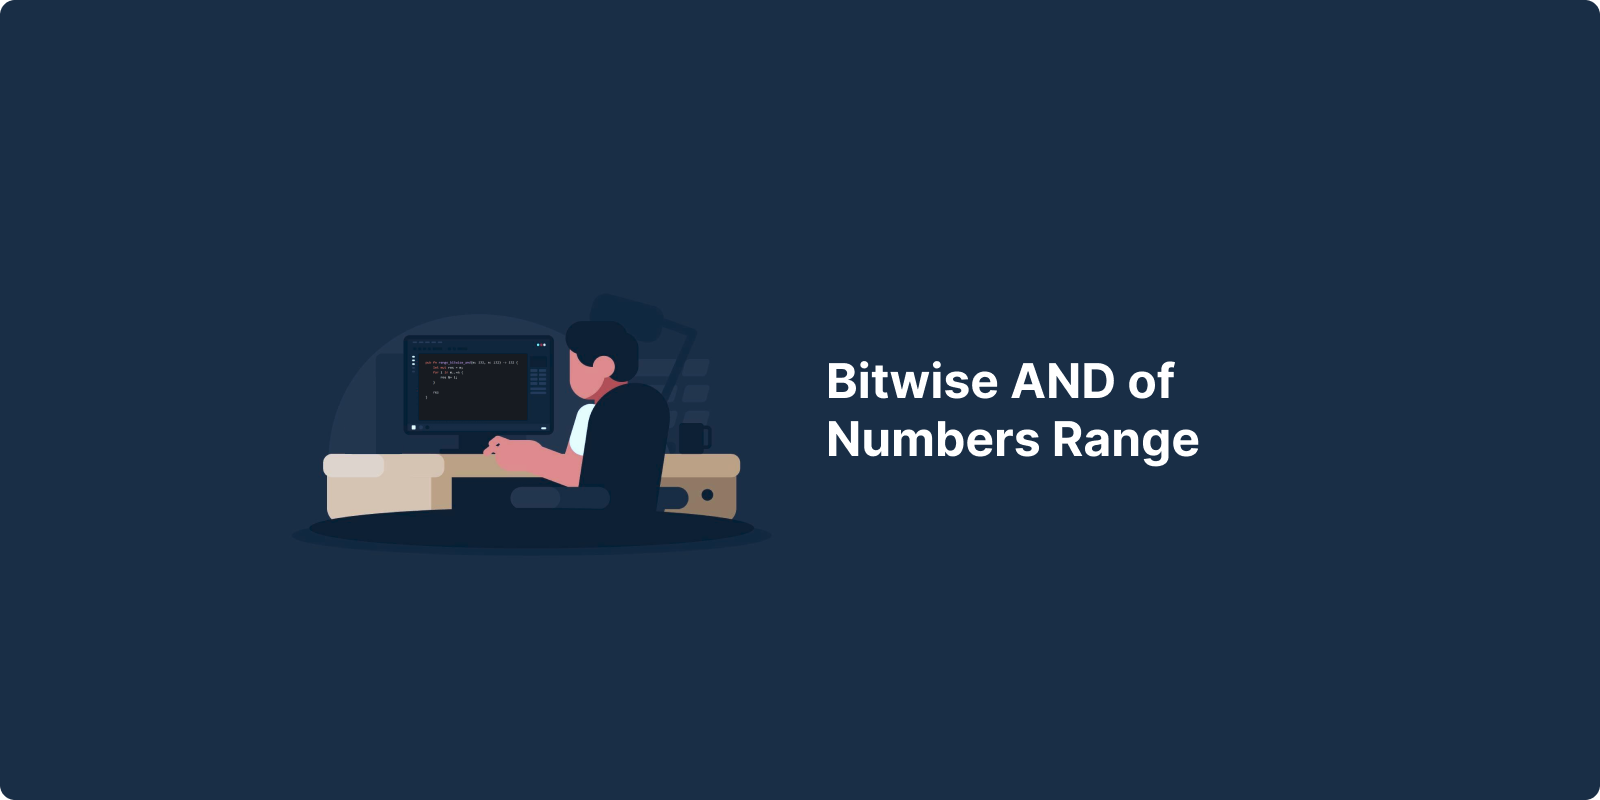 BITWISE AND OF NUMBERS RANGE